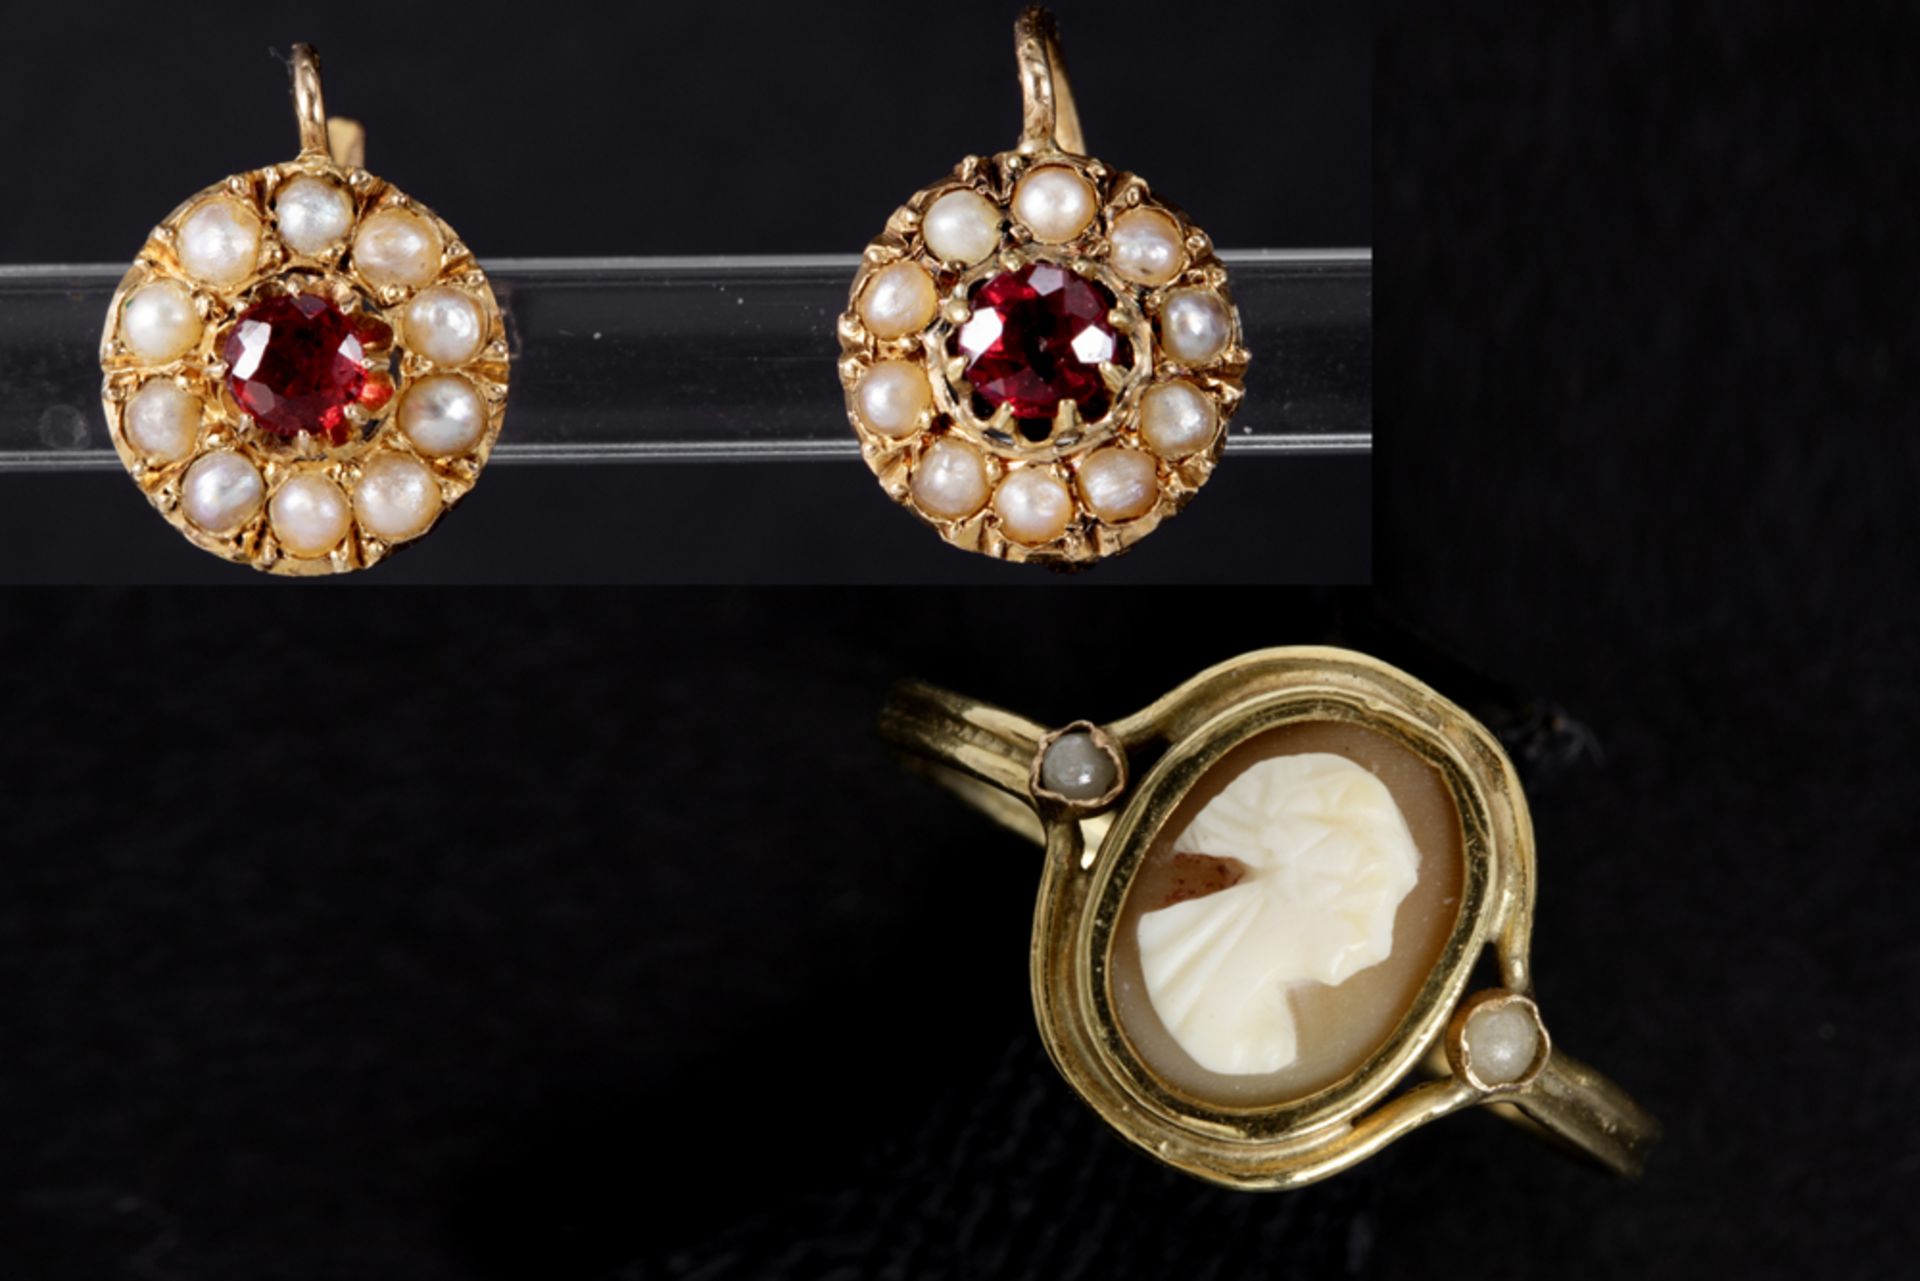 pair of earrings (with verneuil and small pearls) and a ring (with small cameo) in yellow gold (18